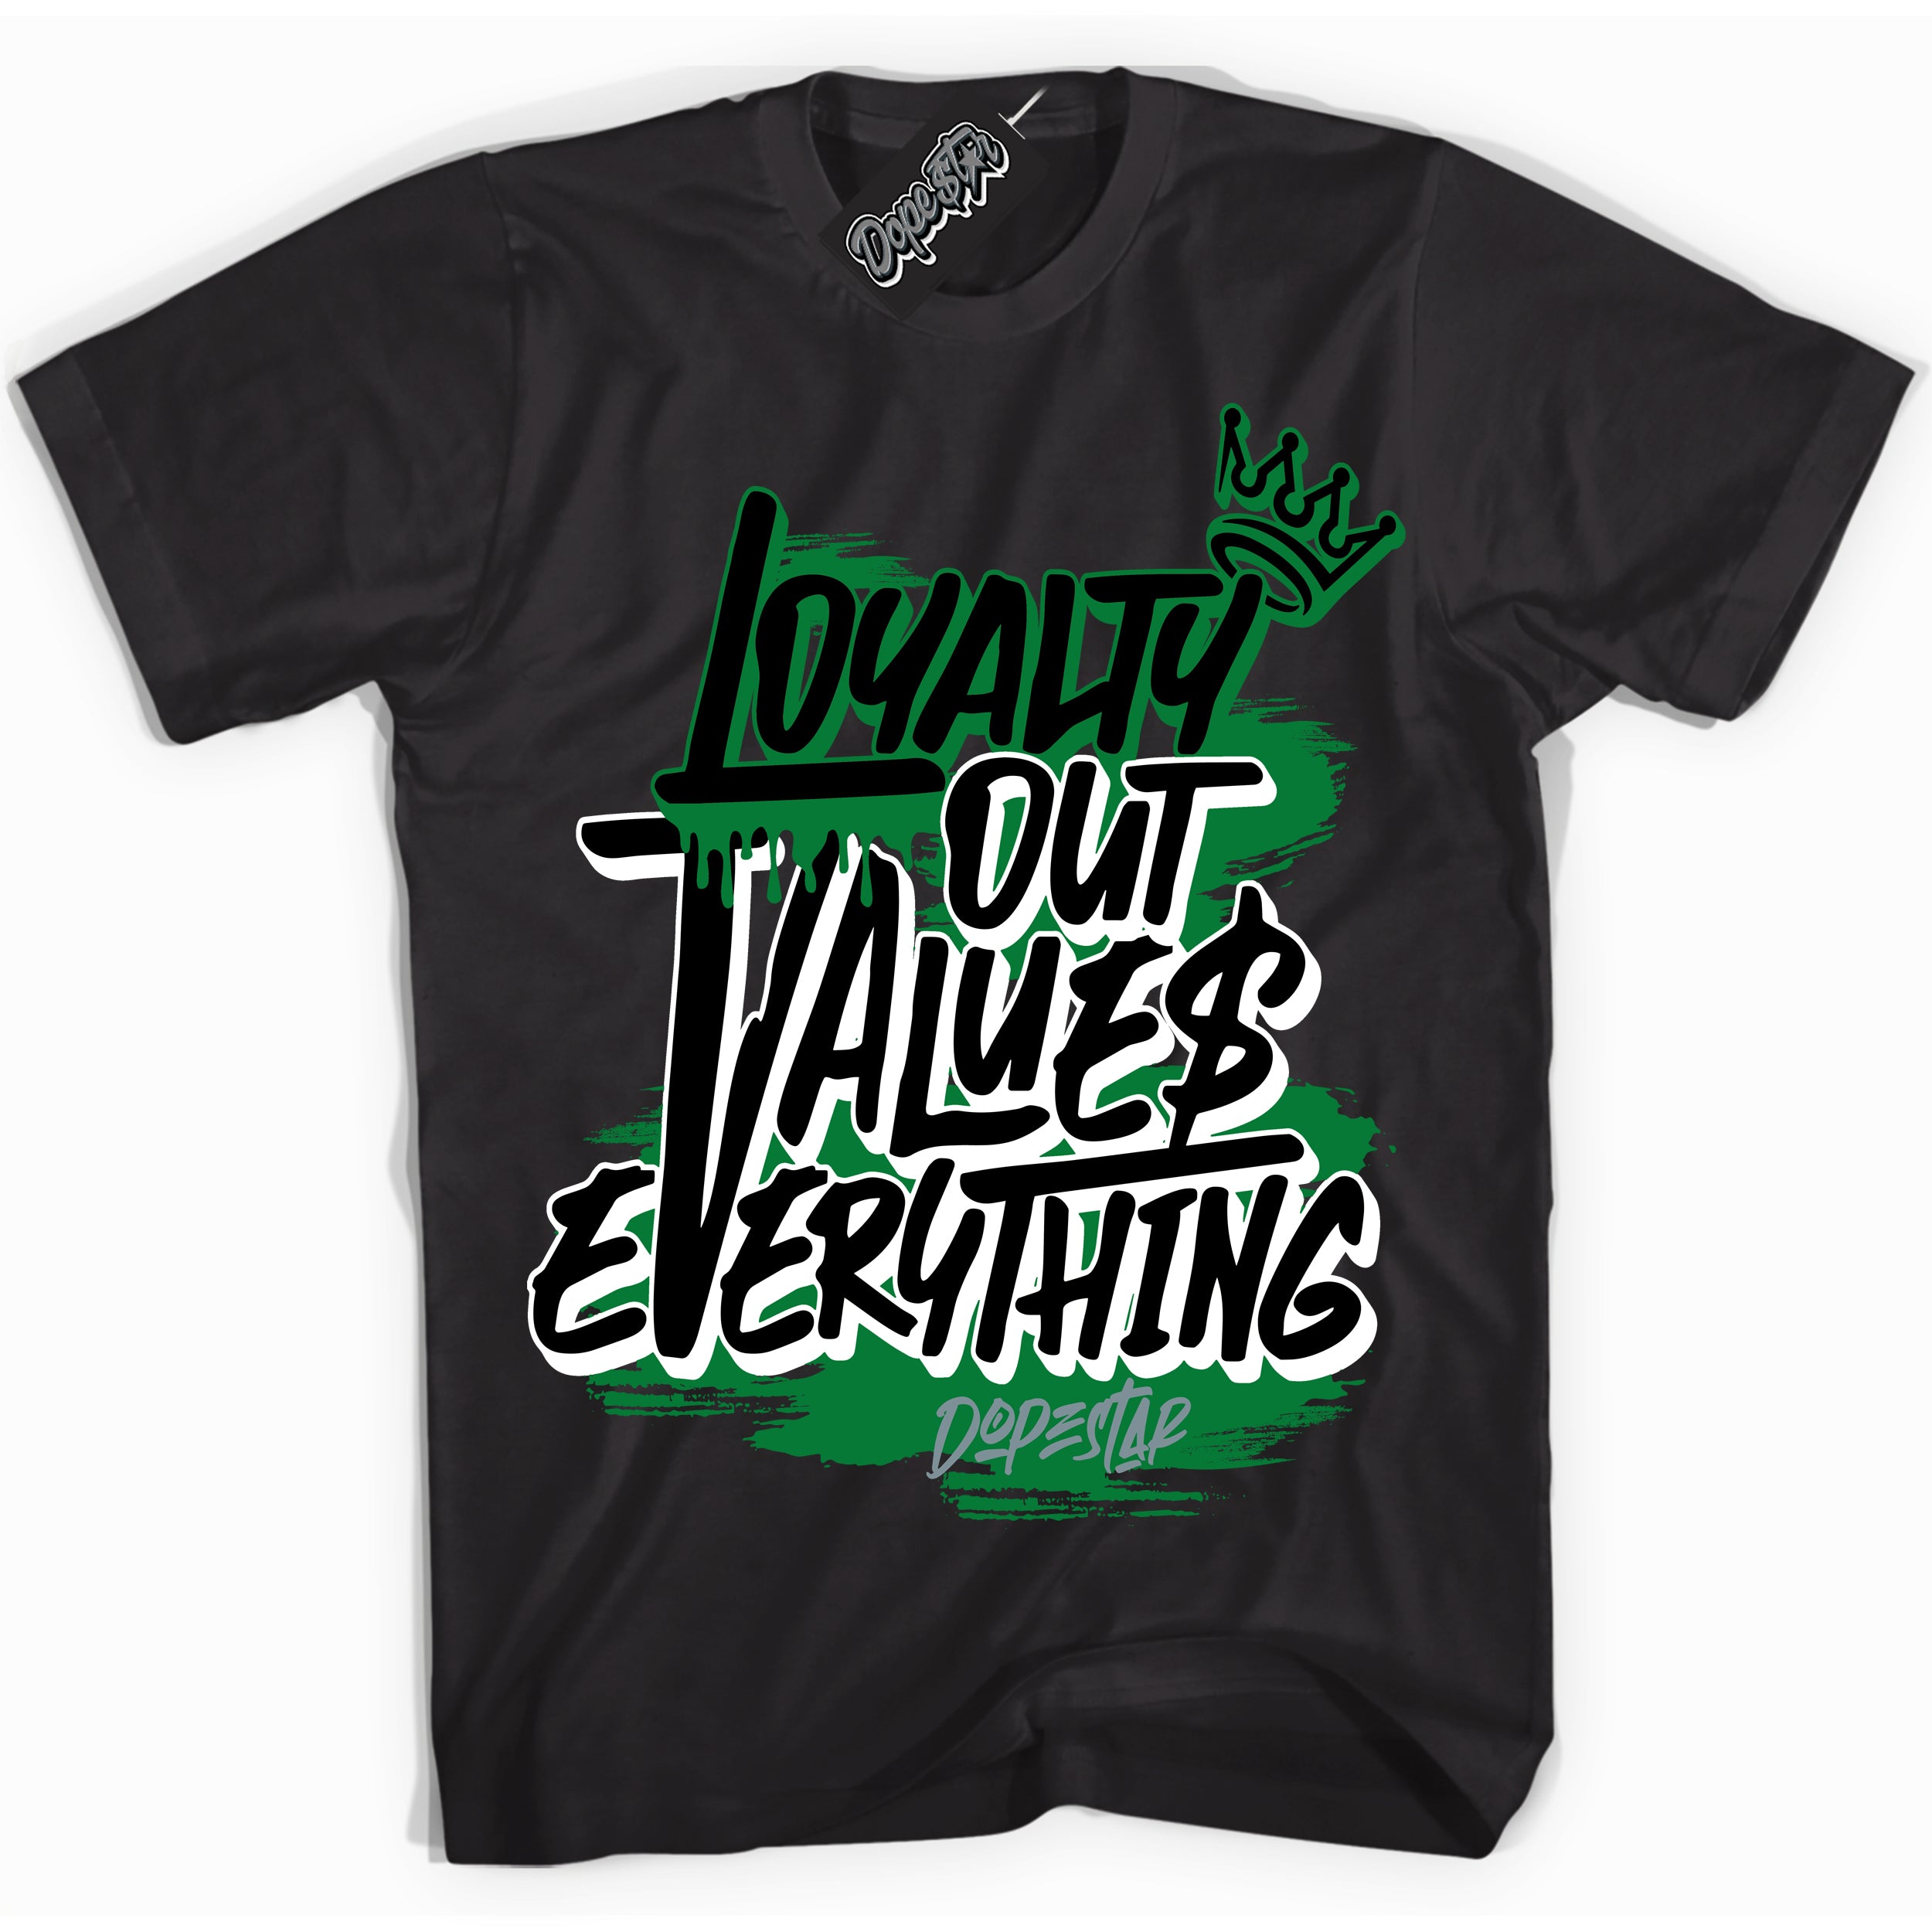 Cool Black Shirt with “ Loyalty Out Values Everything” design that perfectly matches Lucky Green 5s Sneakers.